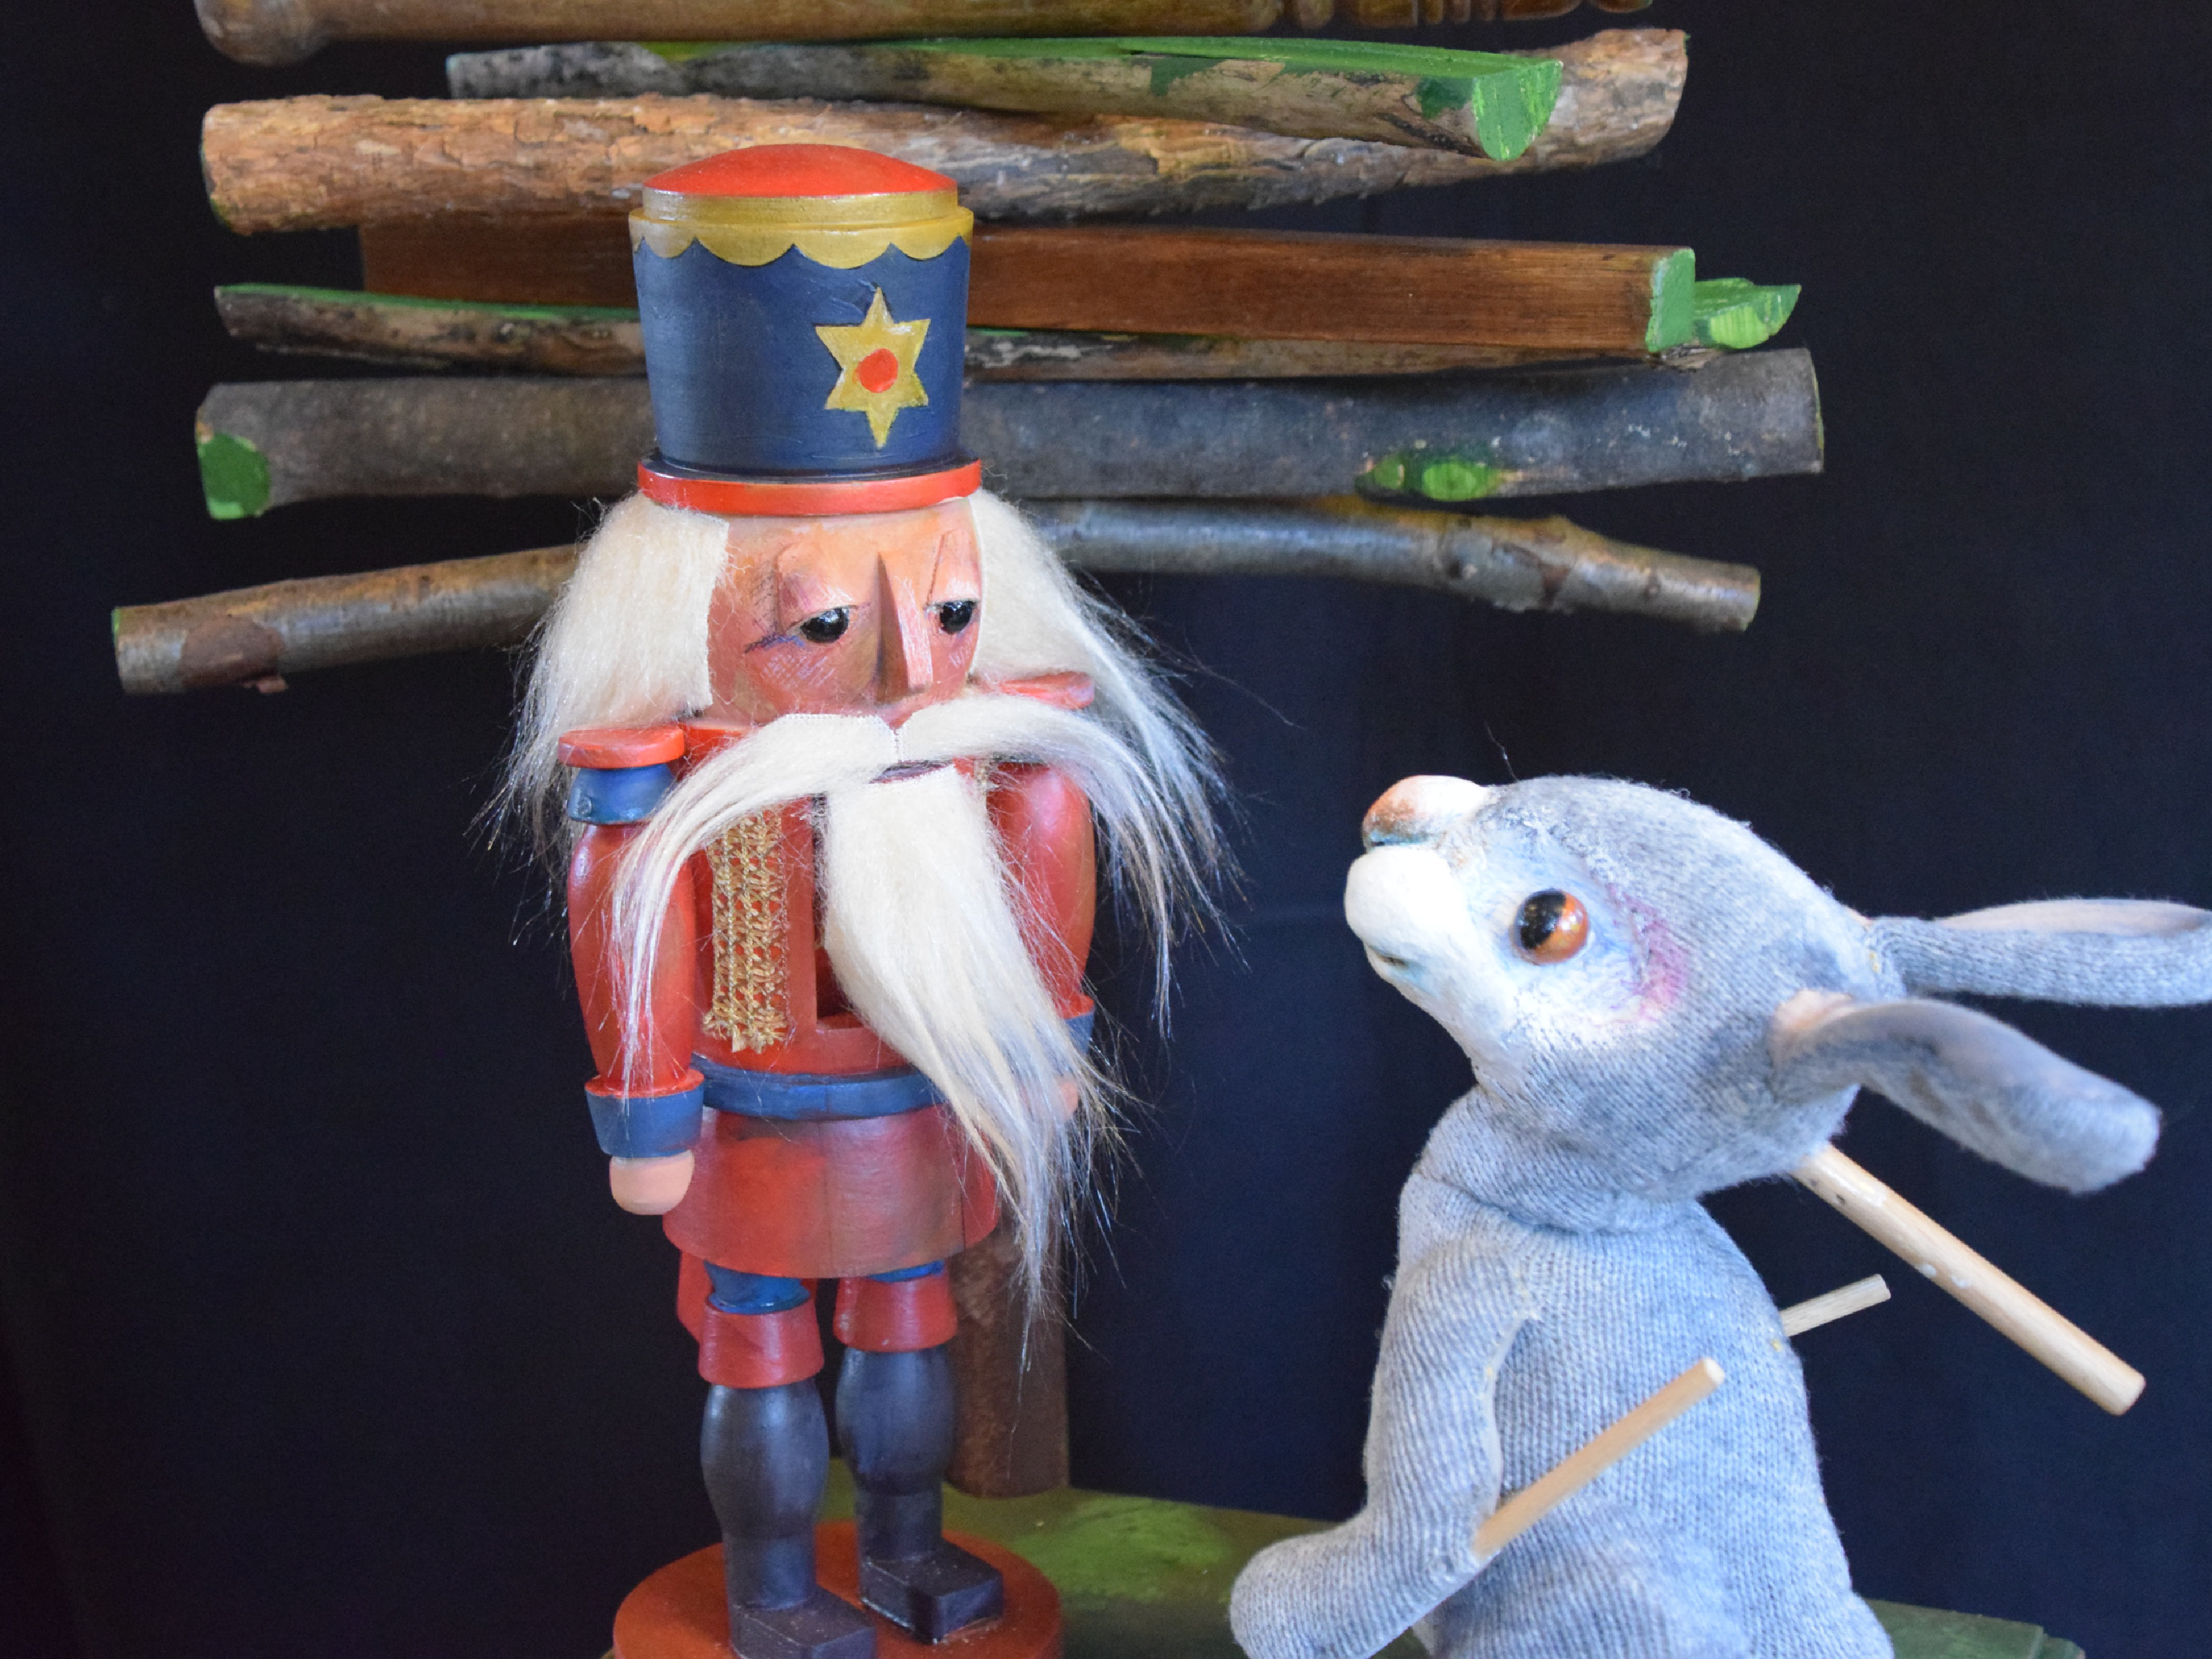 The rag doll of the little rabbit stands in front of a nutcracker with white hair and long bar. In the background there is a Christmas tree made of plain, leafless branches.